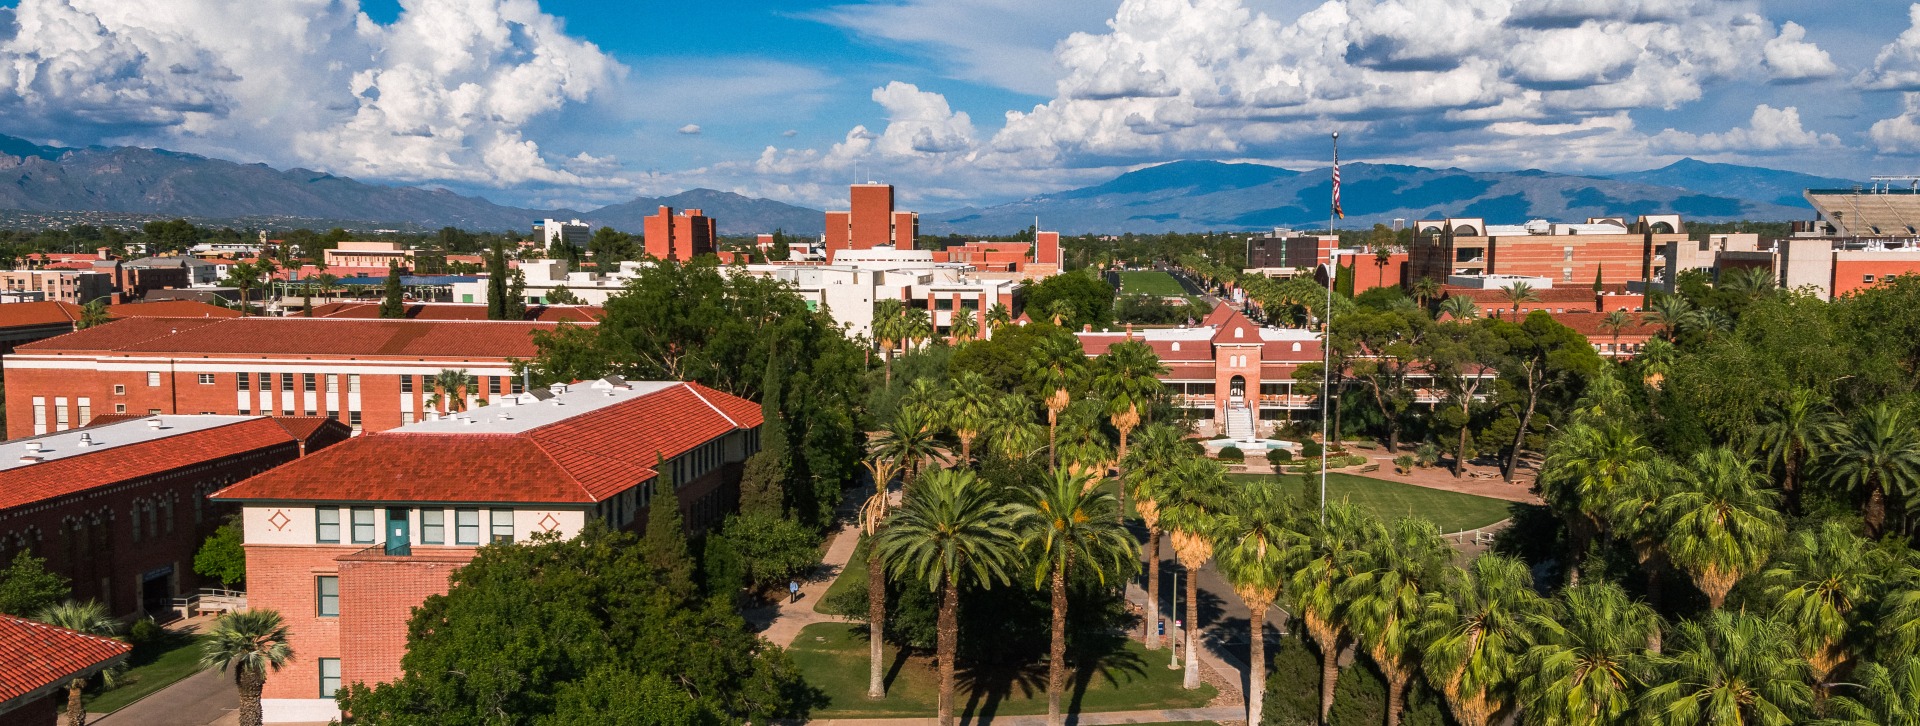 Aerial panoramic image of the University of Arizona campus taken facing east in front of the Old Main building